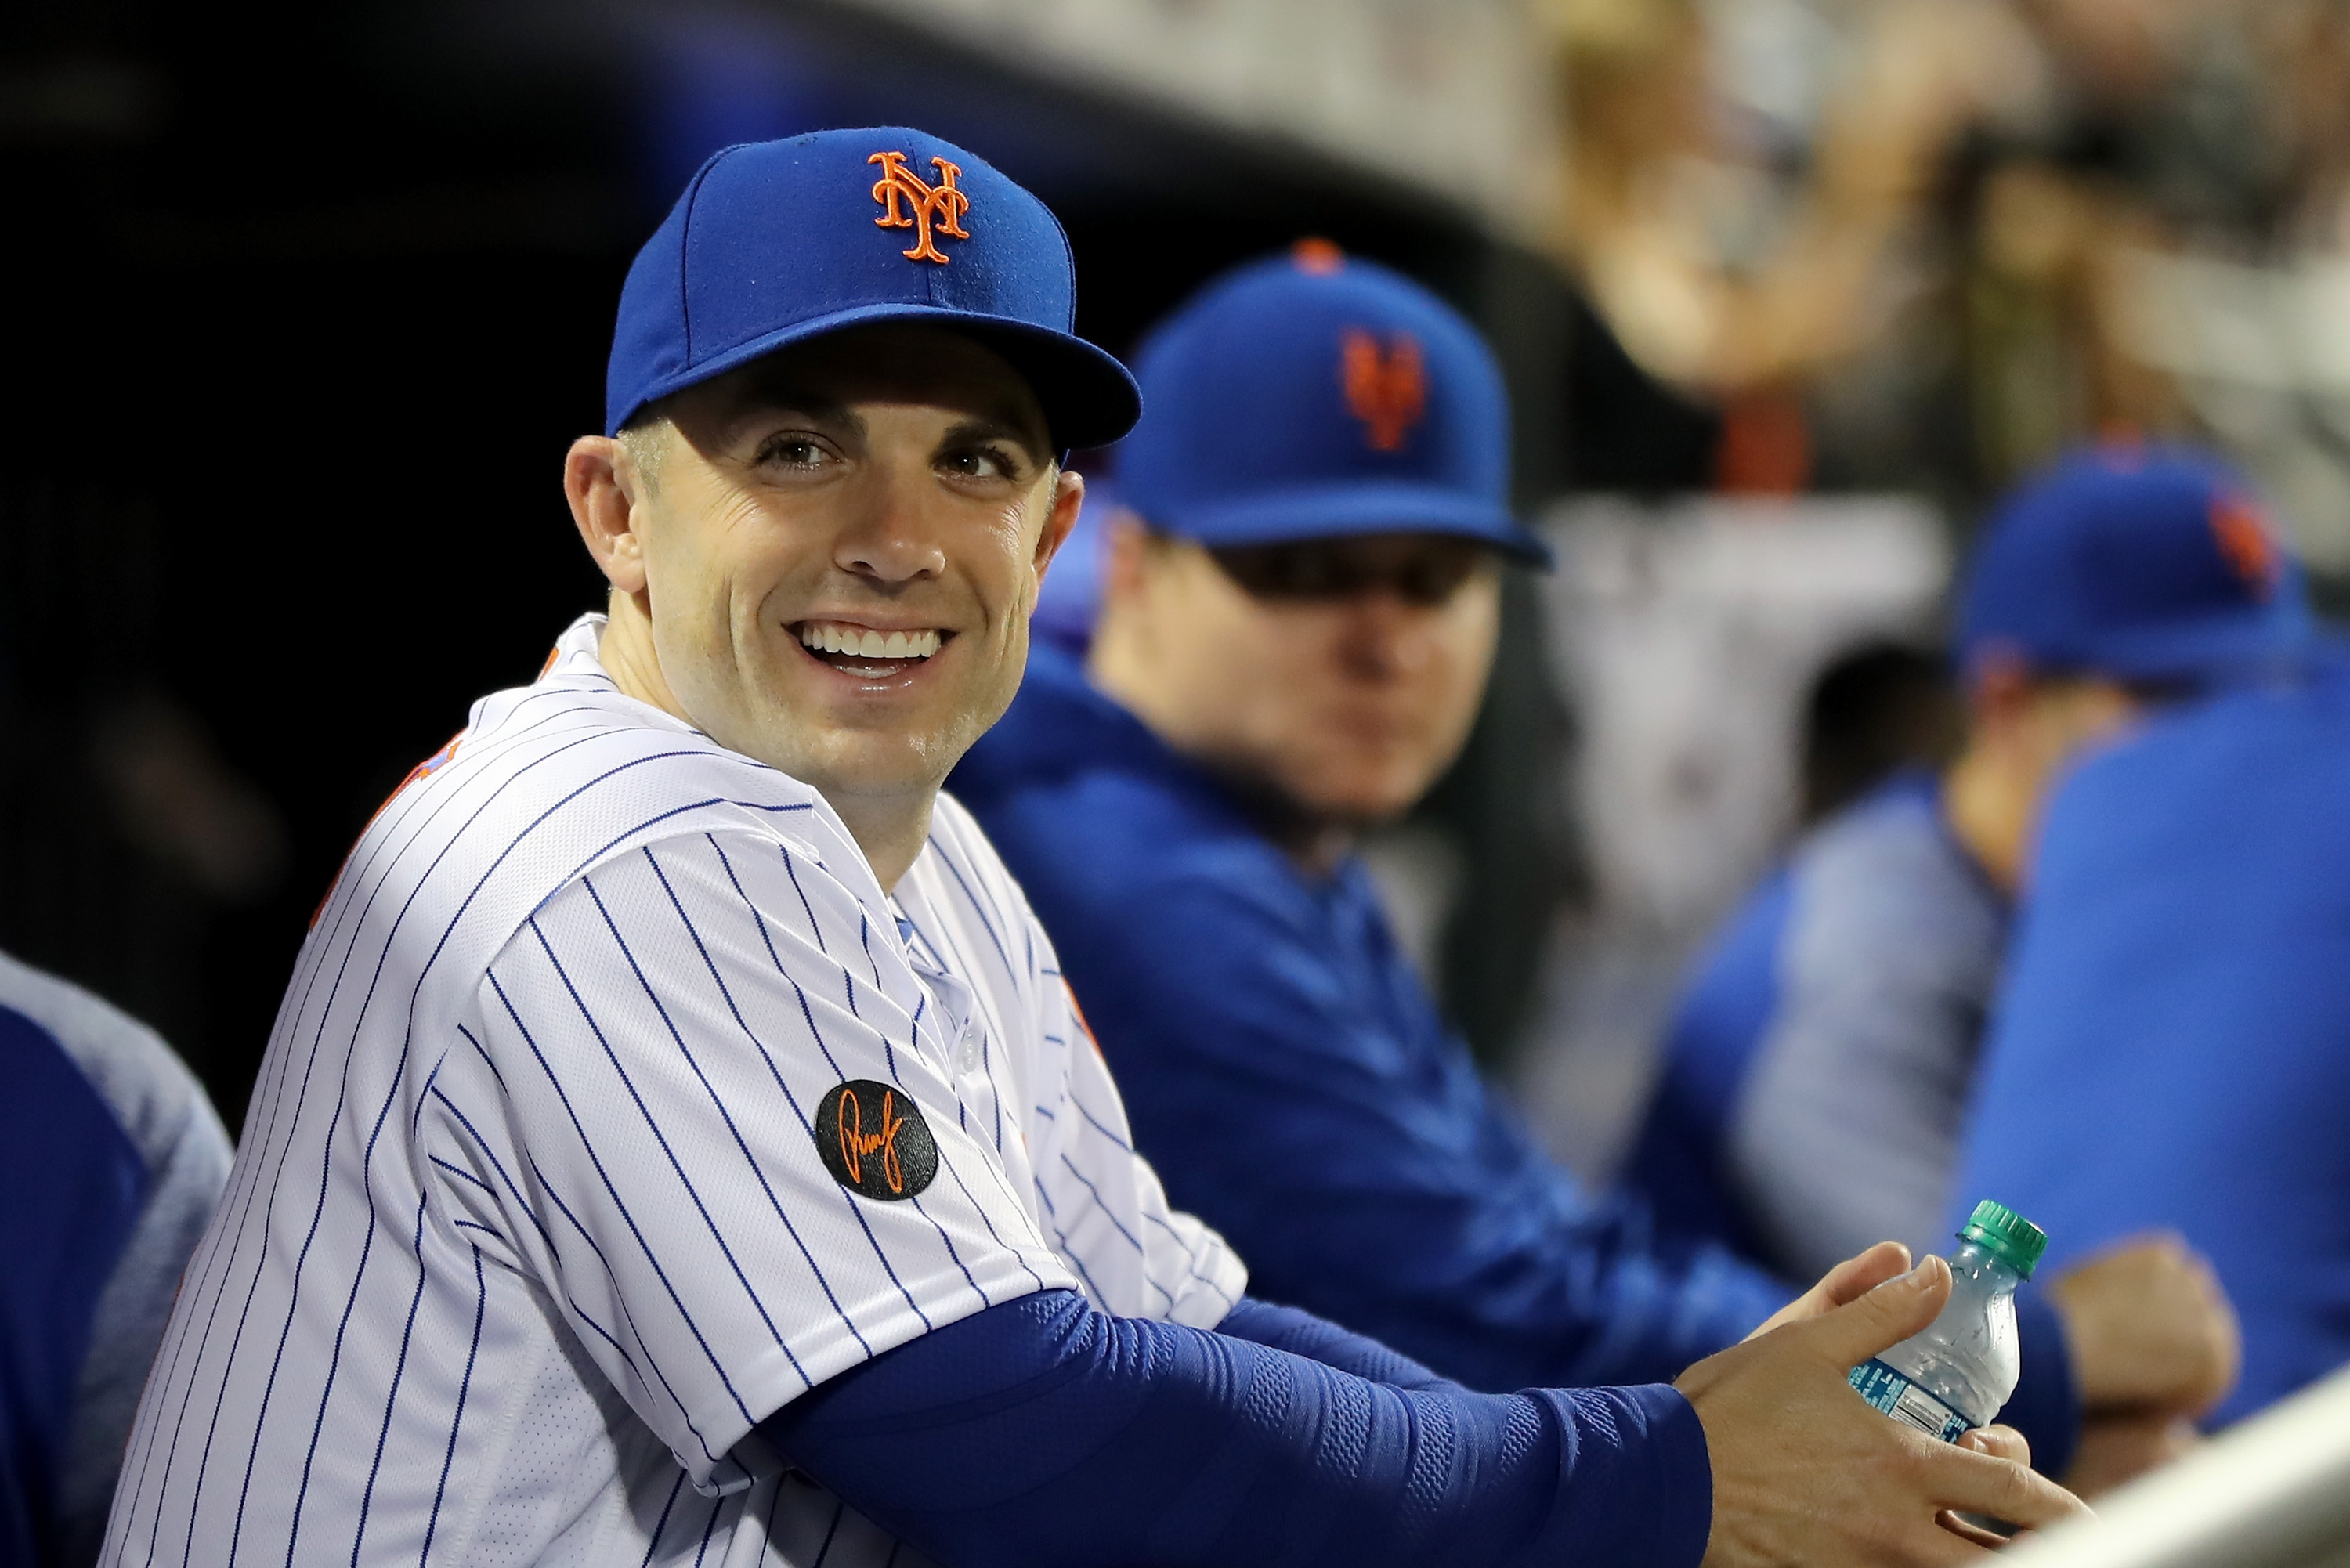 The Hall of Fame link to why David Wright was given No. 5 jersey